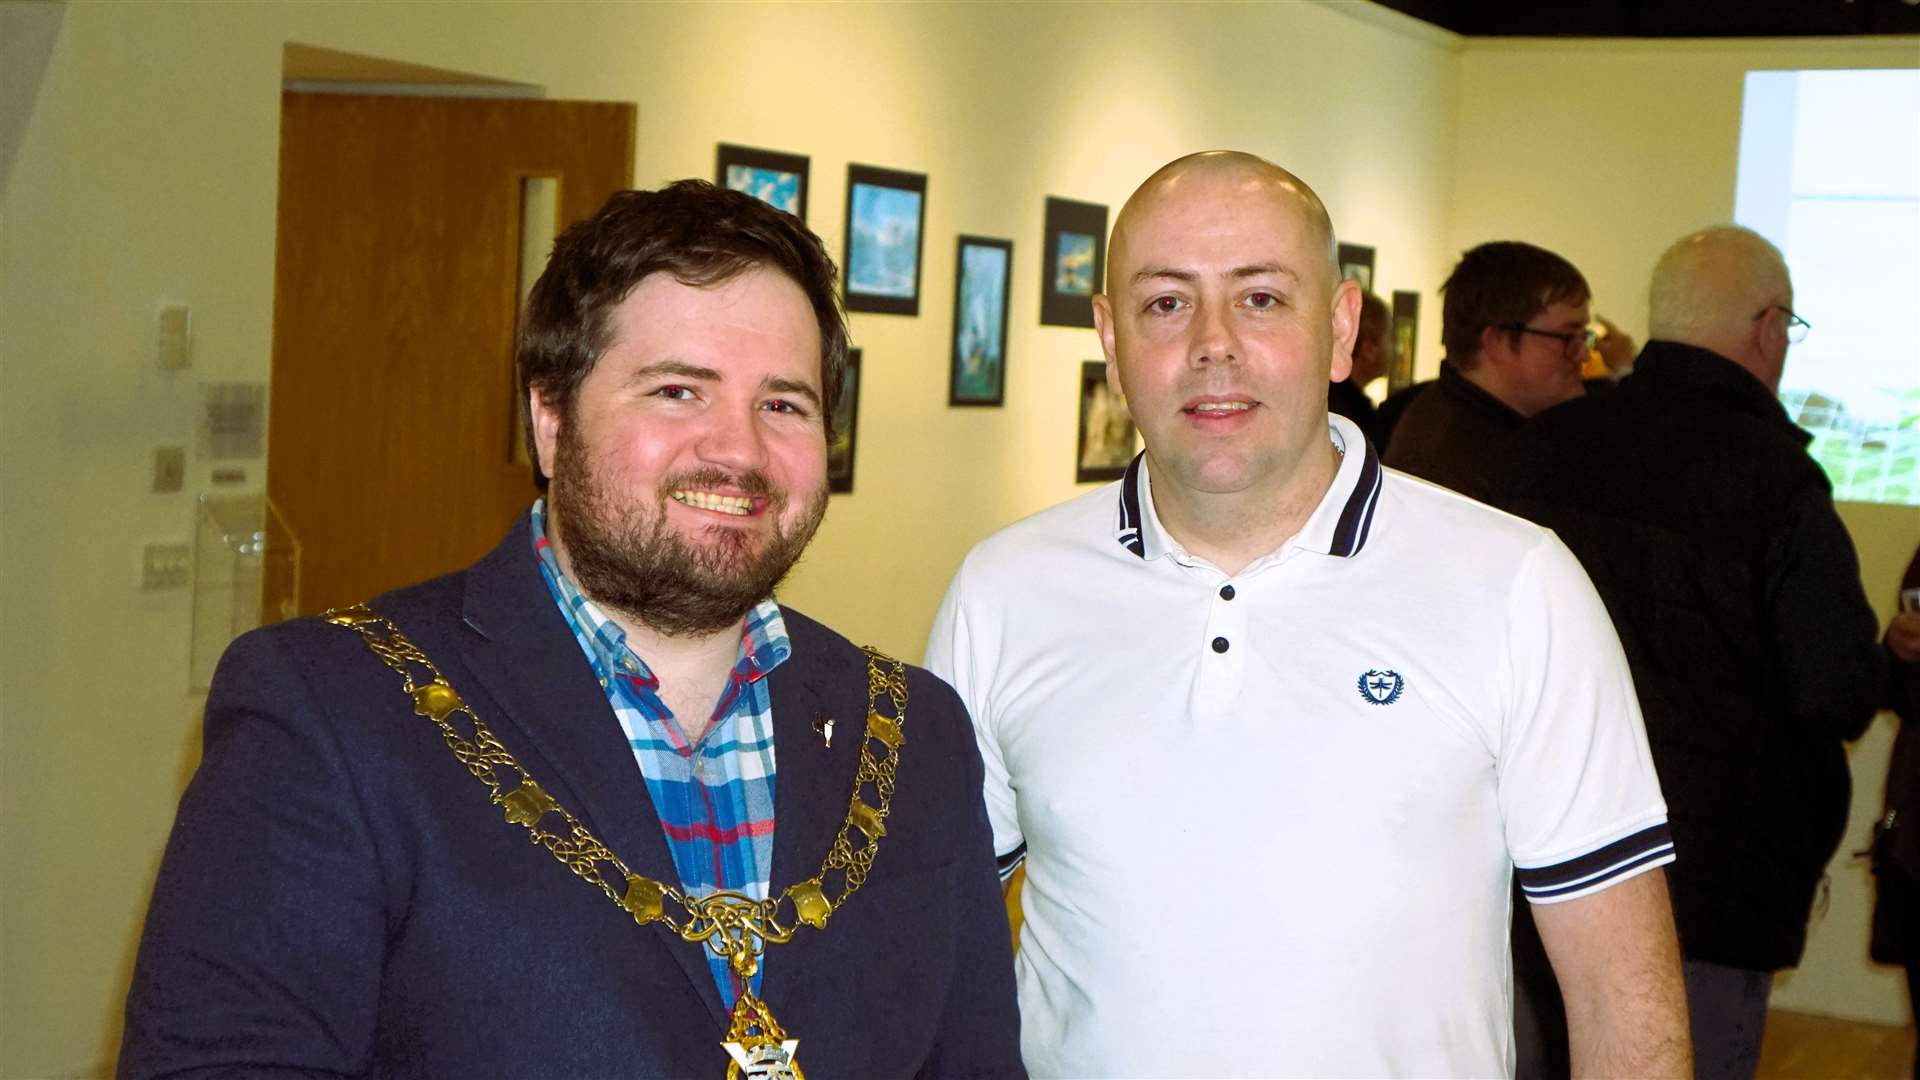 Thurso provost Struan Mackie, at left, with the chair of Thurso Camera Club, Ally Mackechnie at the opening of the show. Picture: DGS